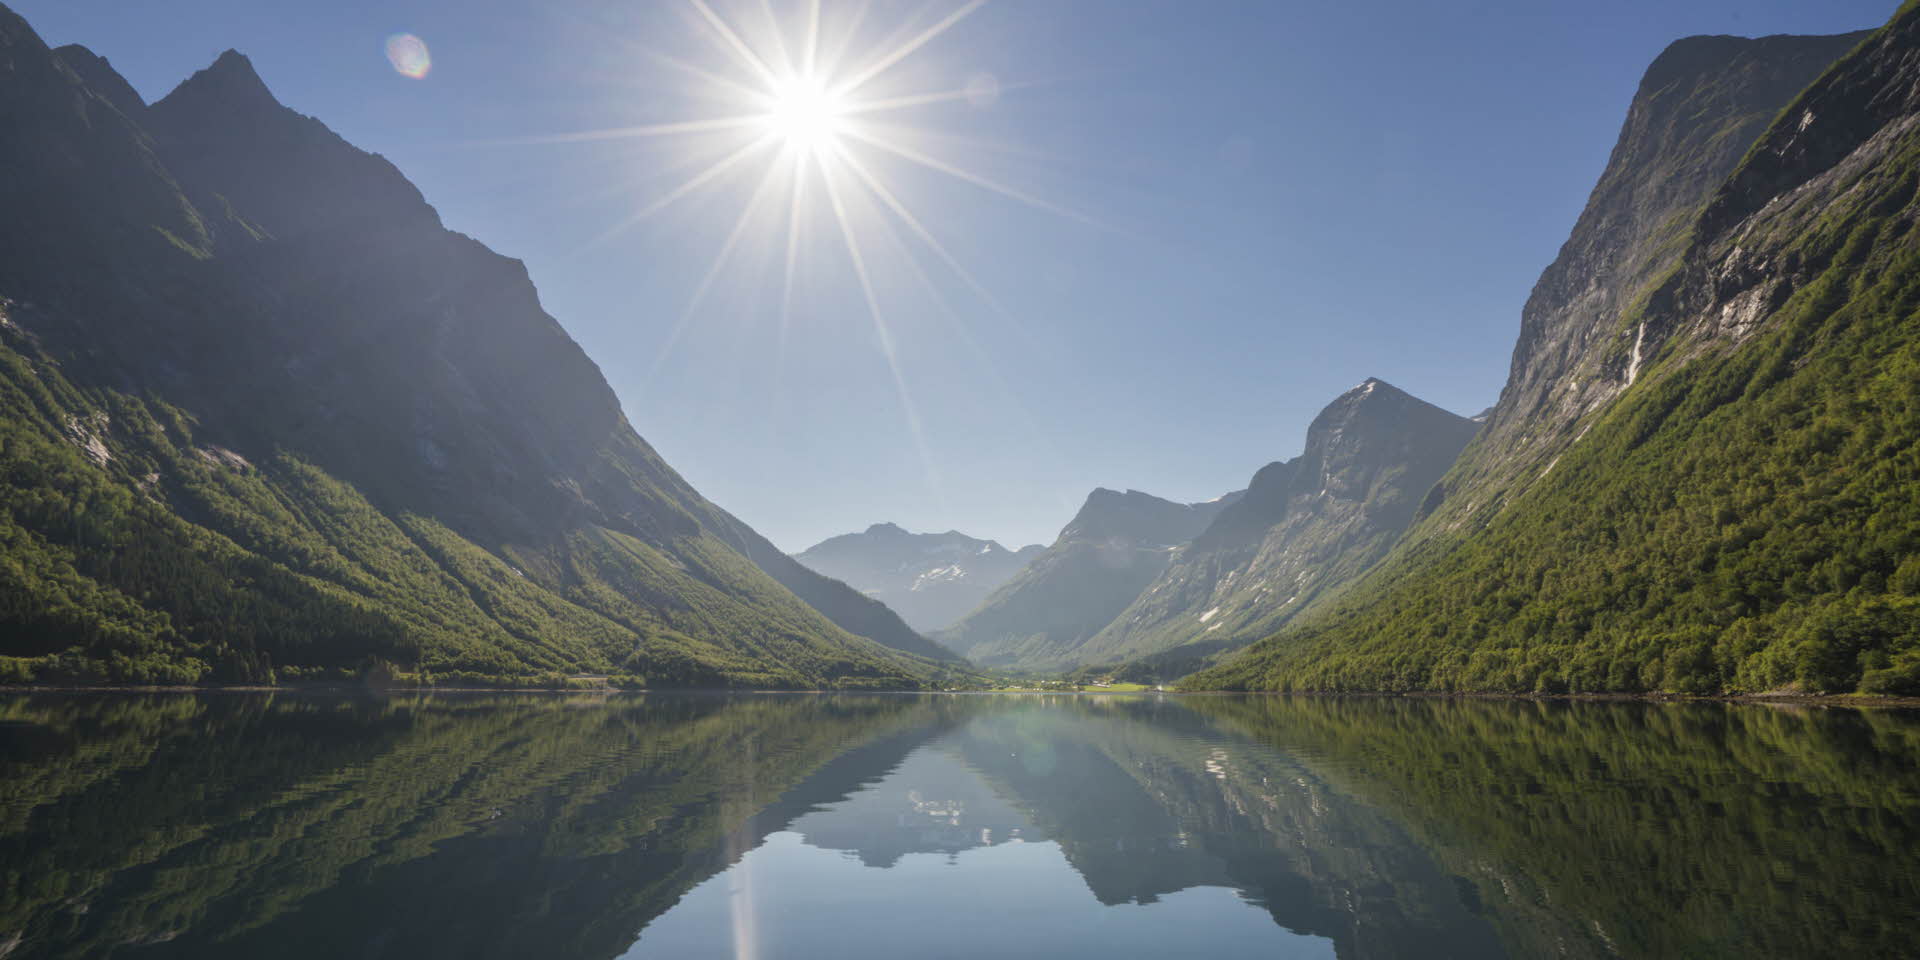 Breathtaking tranqulity as sailing through smooth Hjorndfjord on a bright summer day